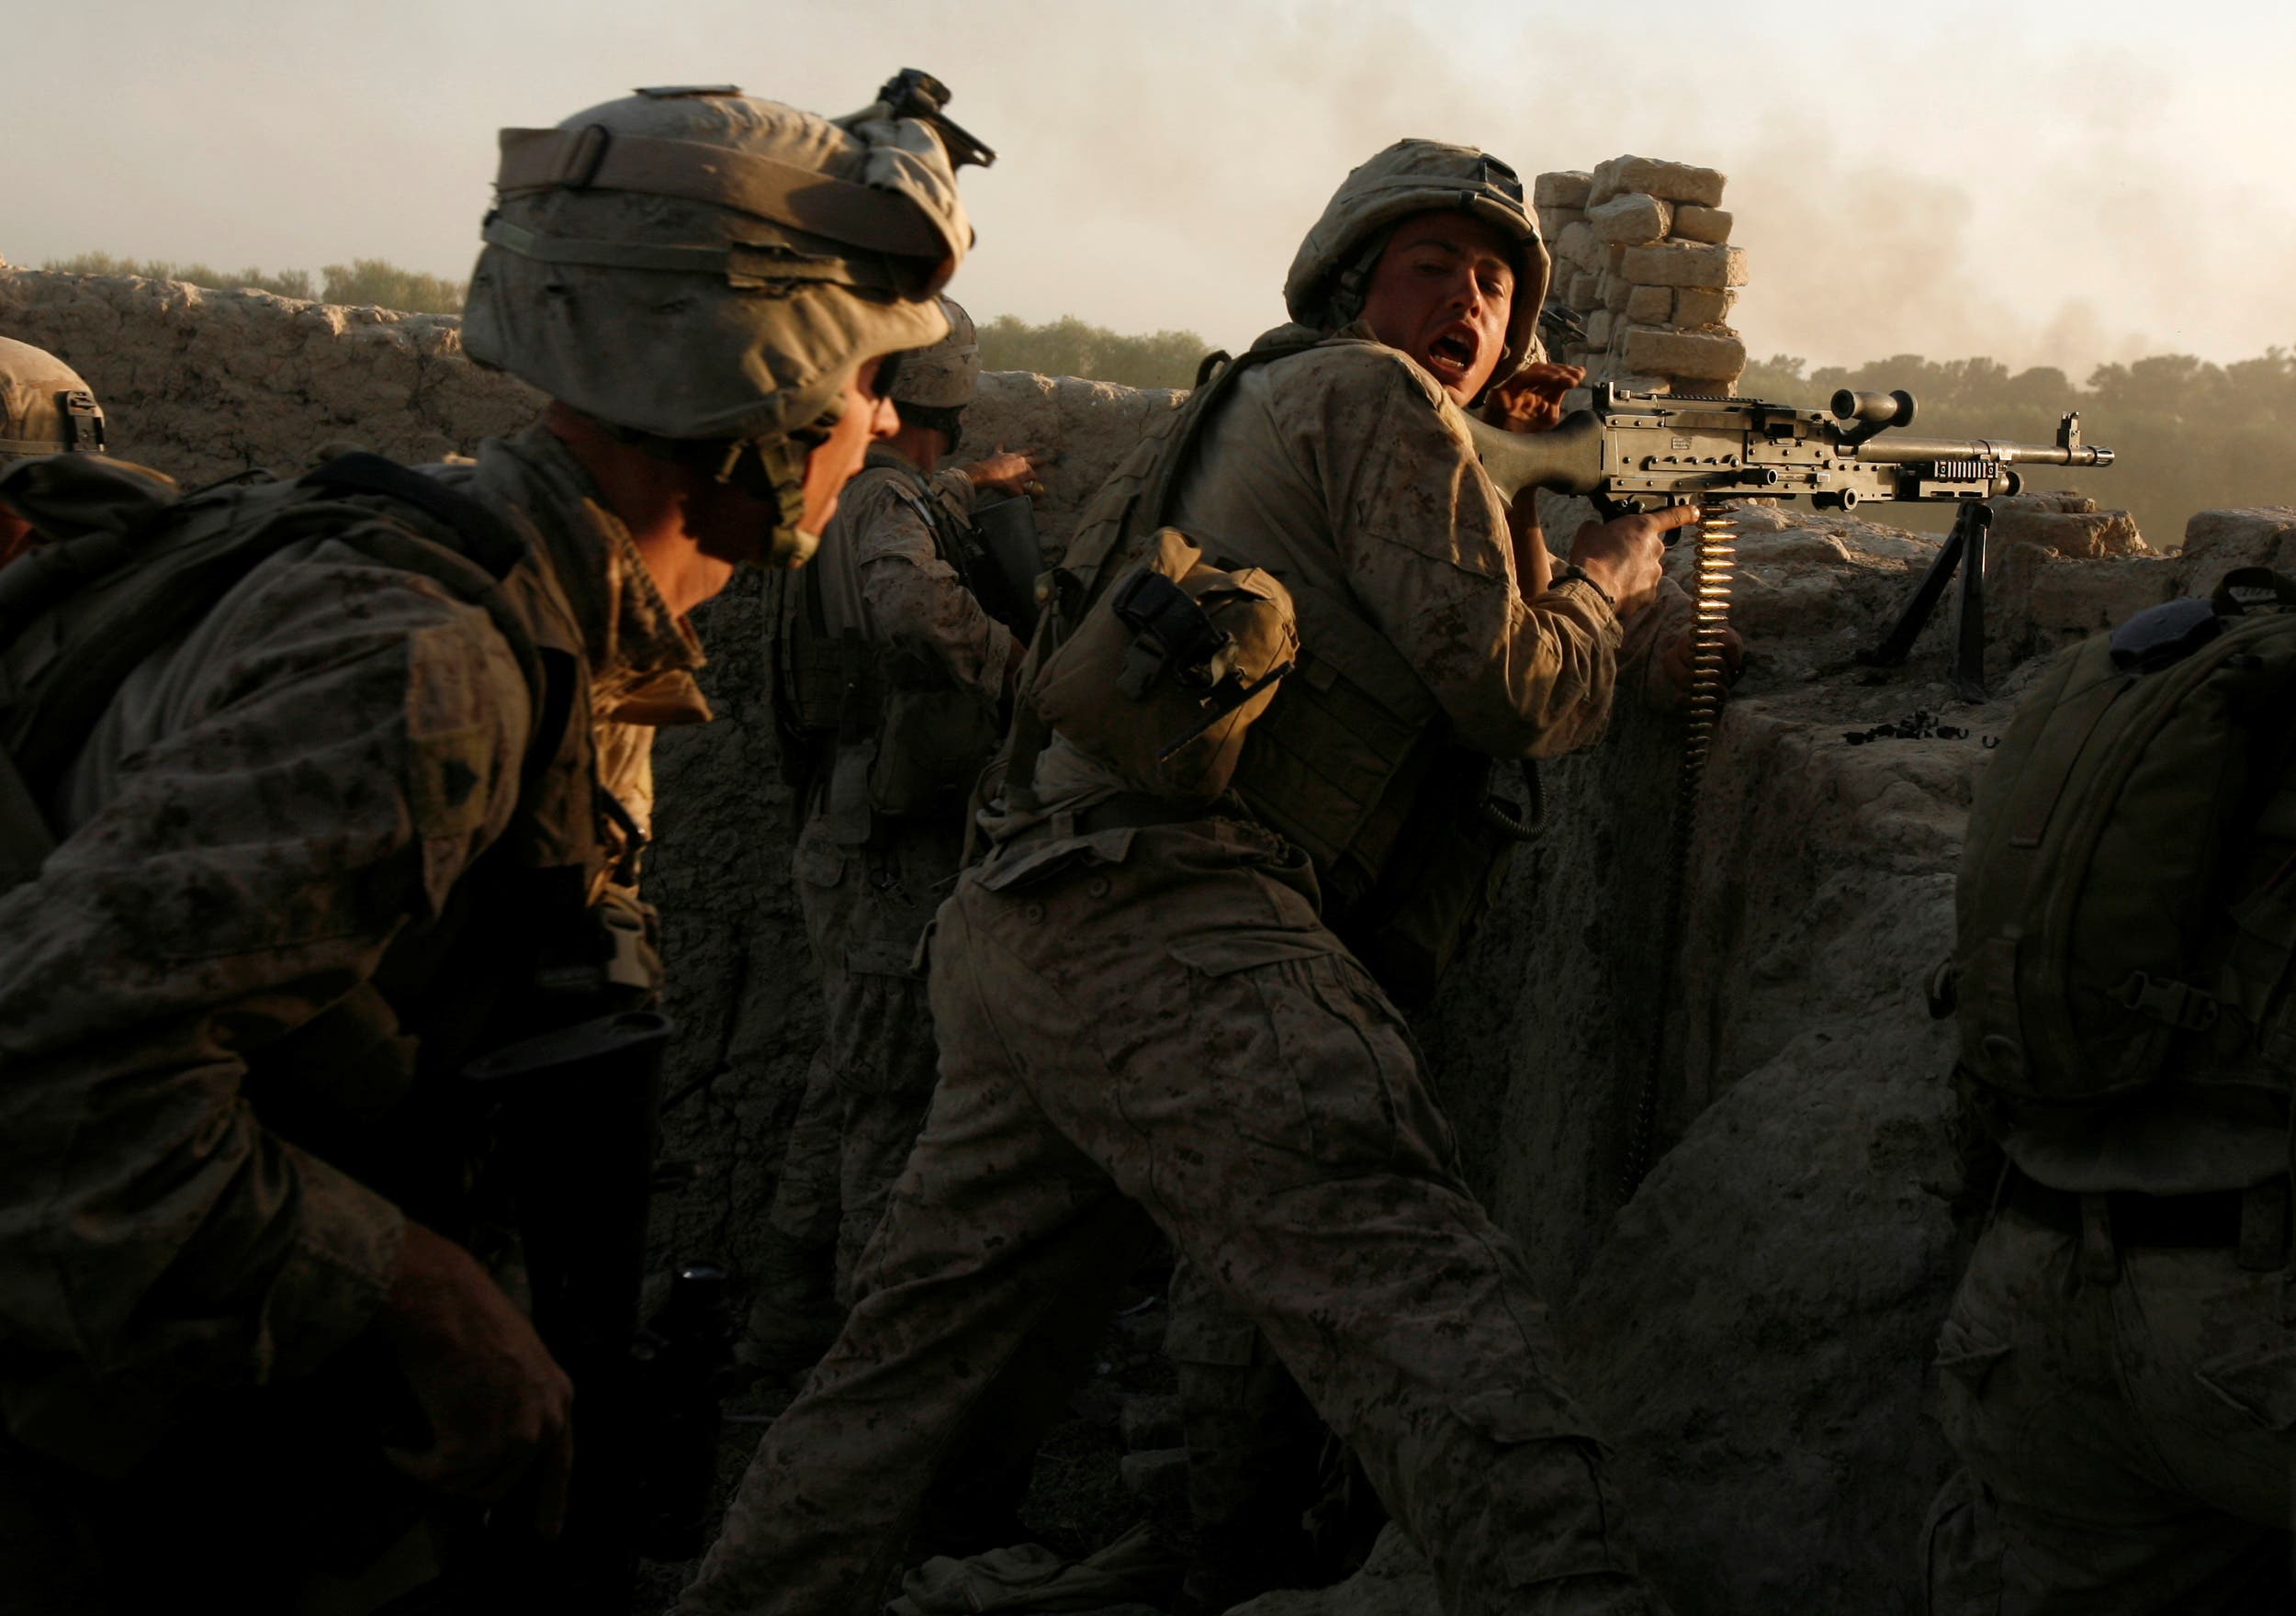 US Marines fire during a Taliban ambush as they carry out an operation to clear an area in Helmand province, Afghanistan, October 9, 2009. (Reuters)